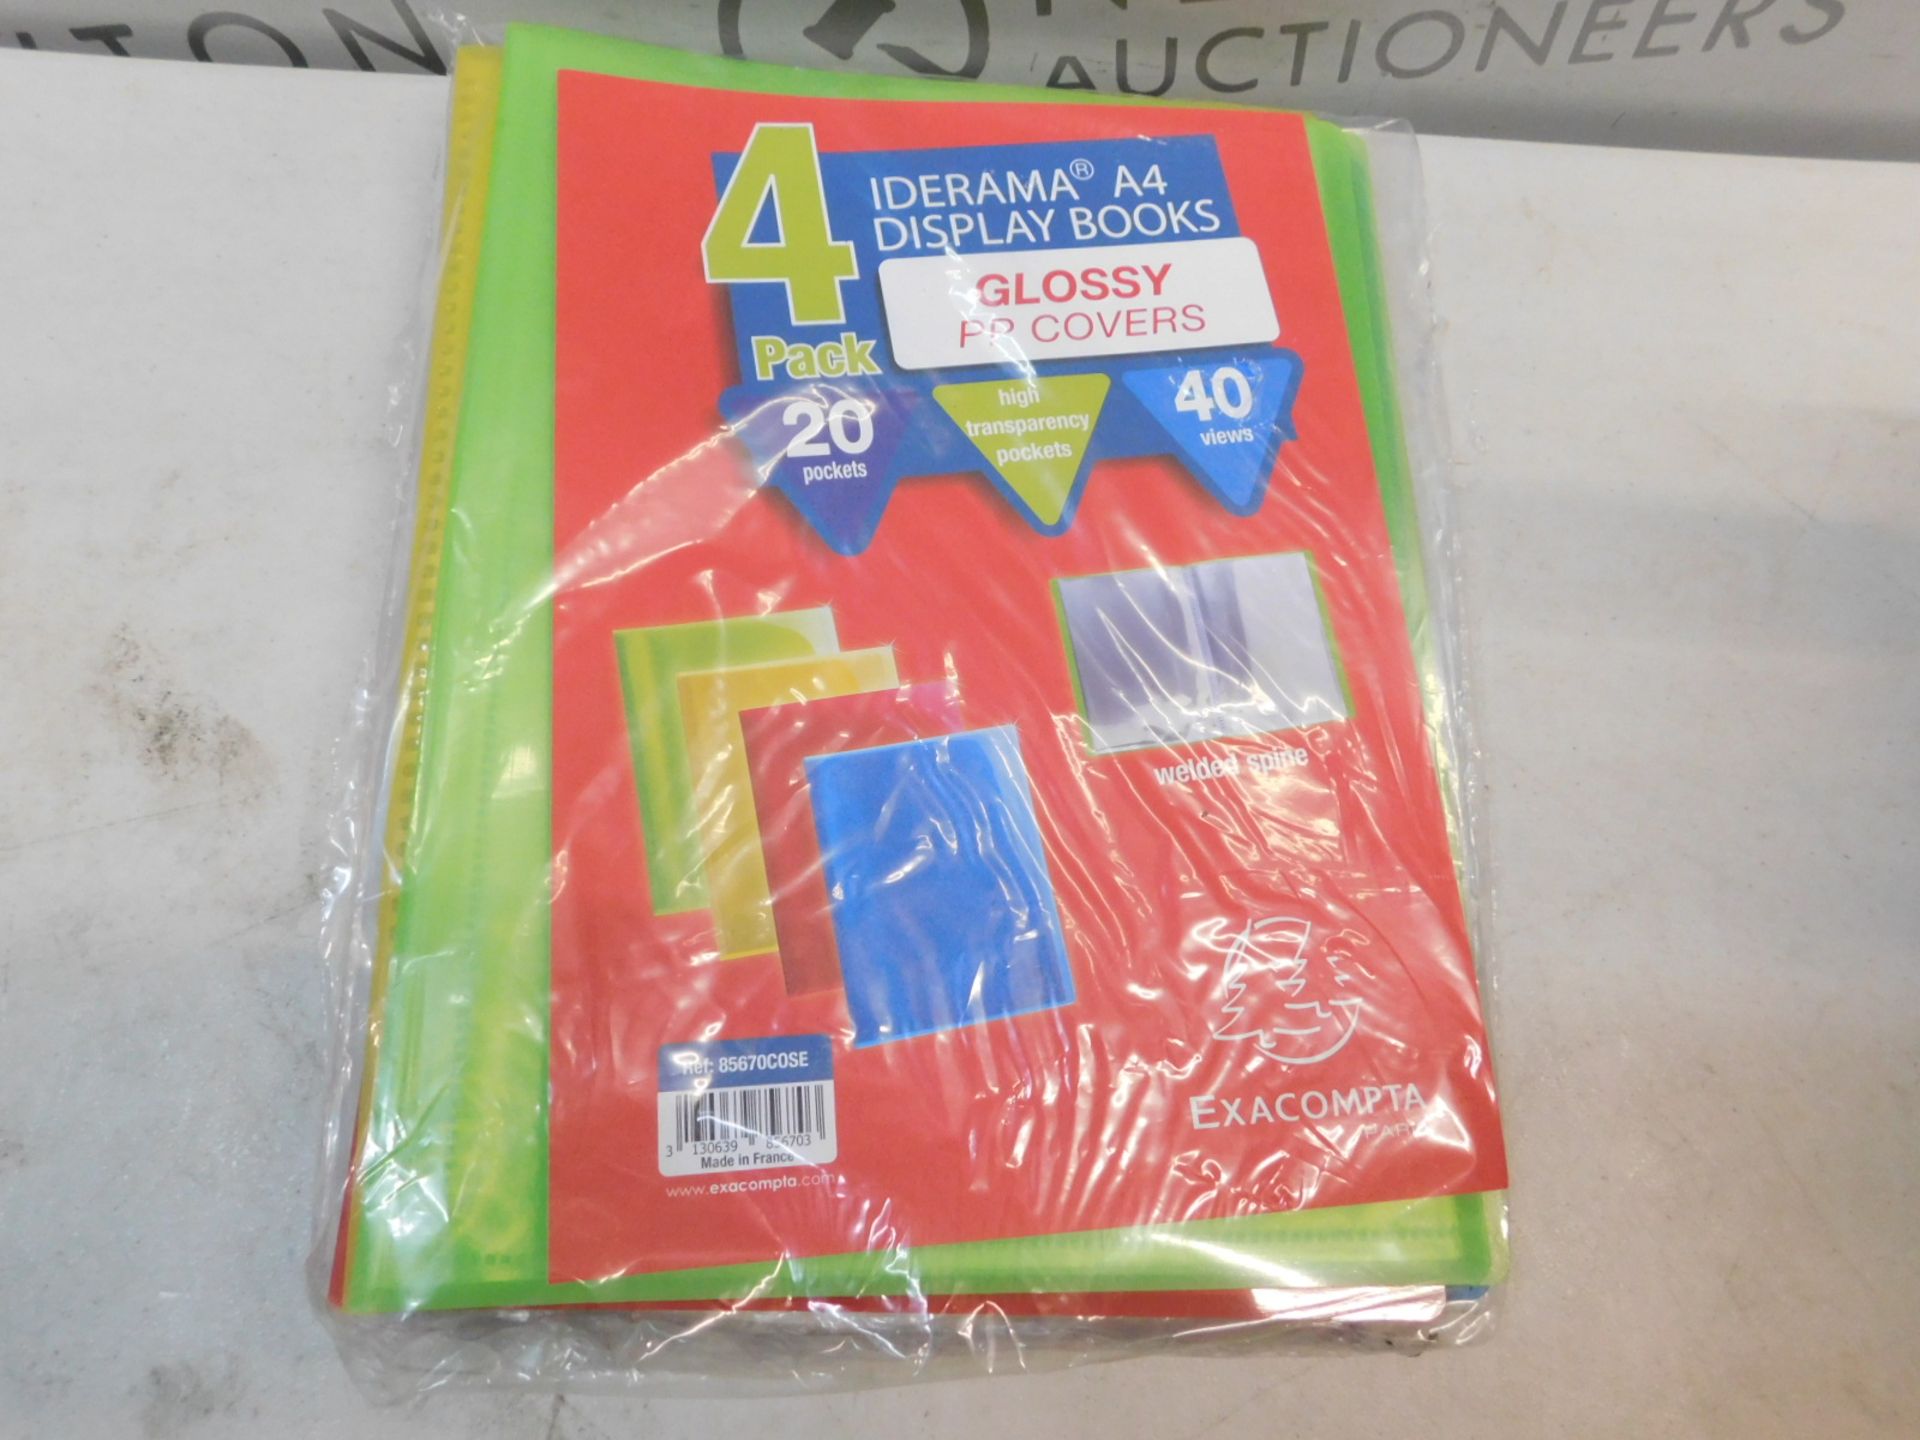 1 BRAND NEW PACK OF 4 EXACOMPTA A4 20 POCKET GLOSSY DISPLAY BOOKS RRP Â£24.99